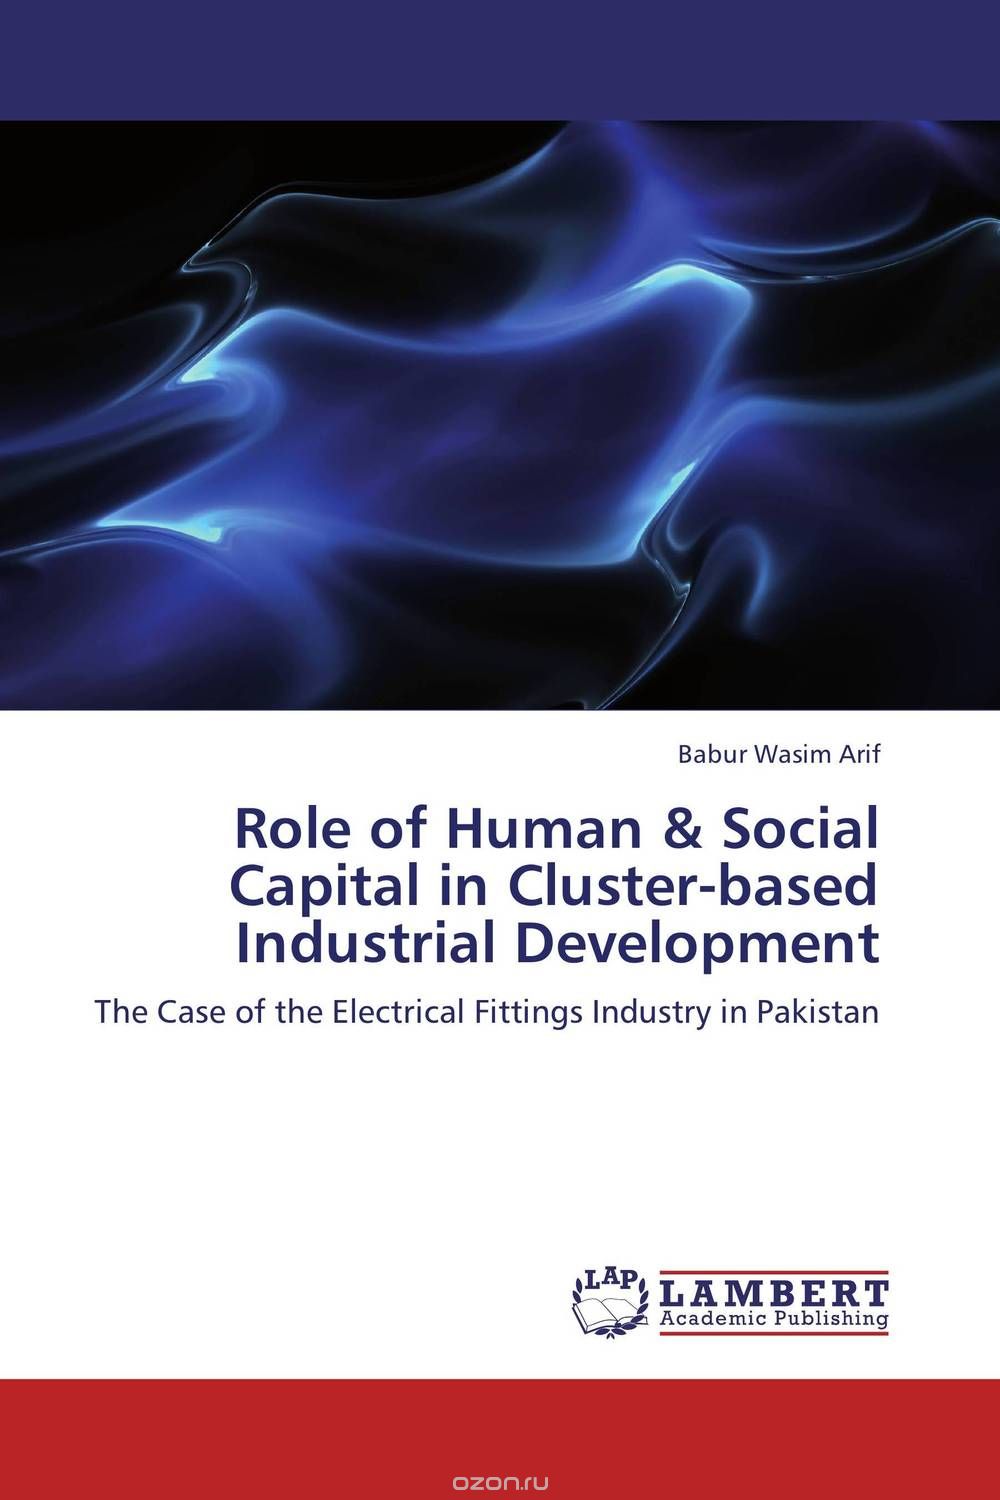 Role of Human & Social Capital in Cluster-based Industrial Development